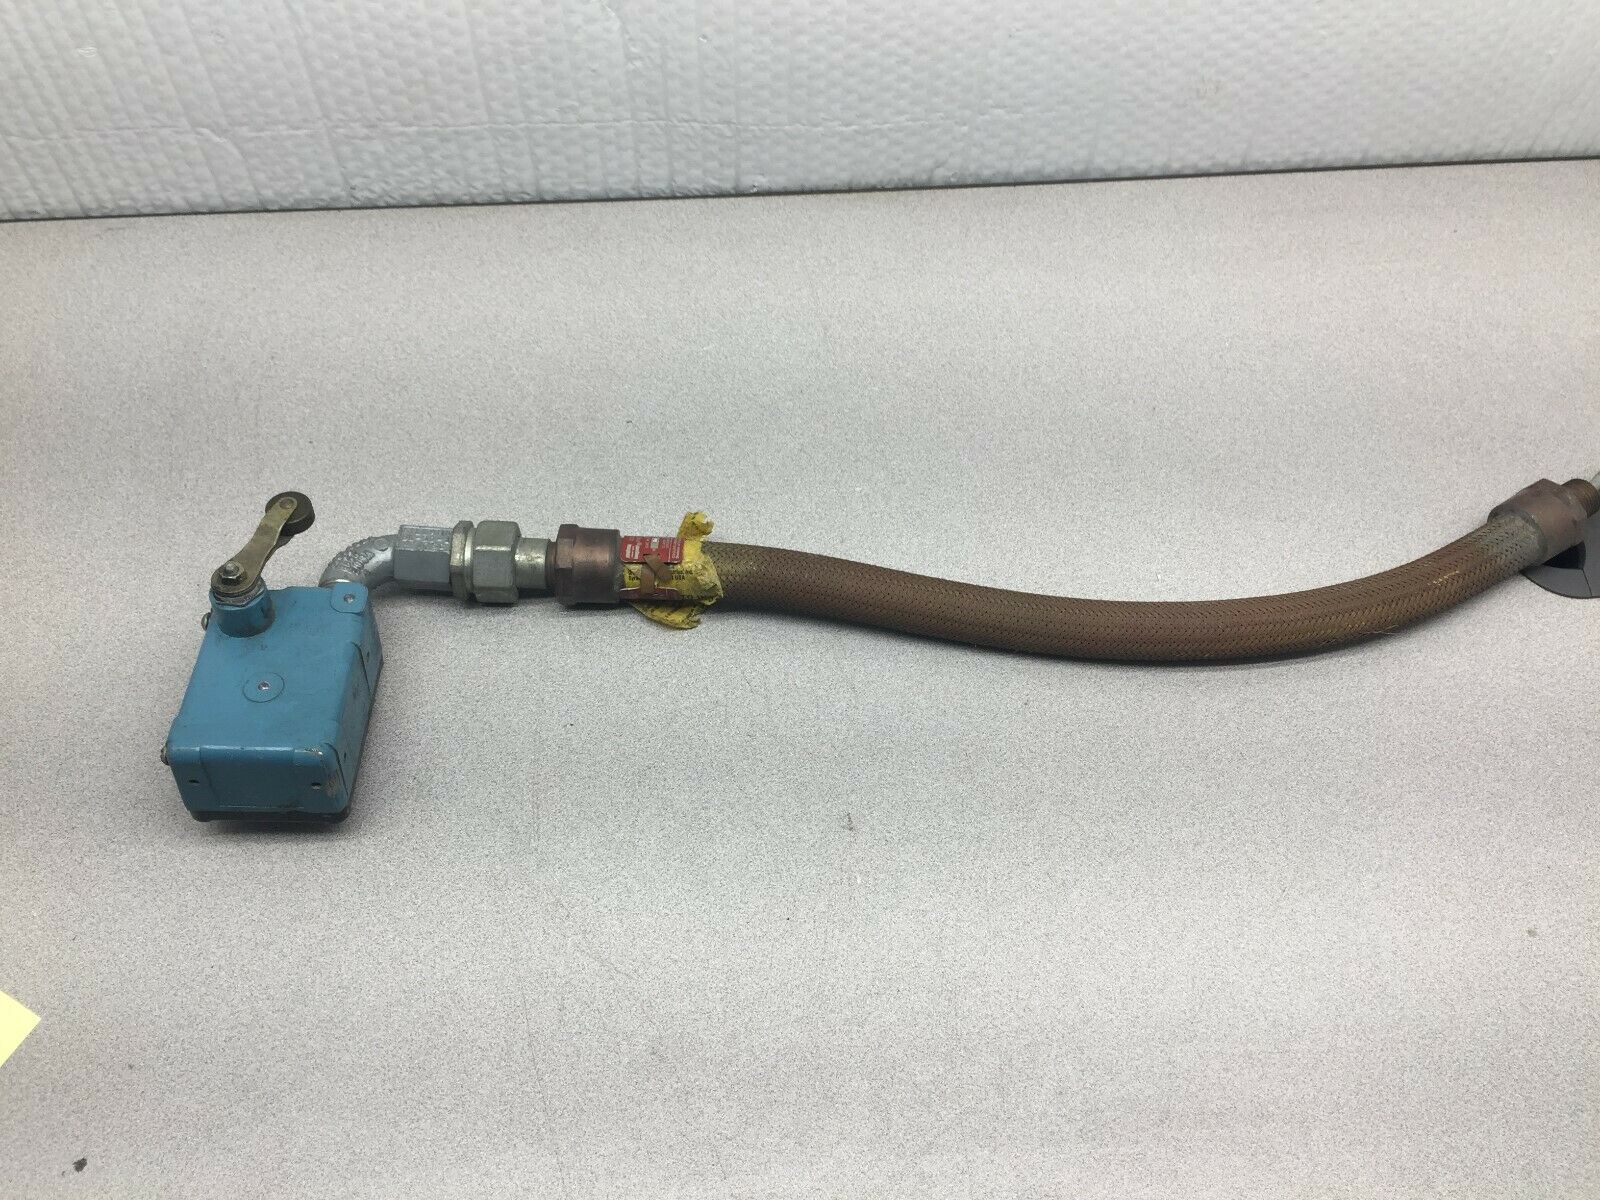 USED MICRO SWITCH EXPLOSION PROOF SWITCH WITH EXPLOSION PROOF FLEX CONDUIT EX-AR